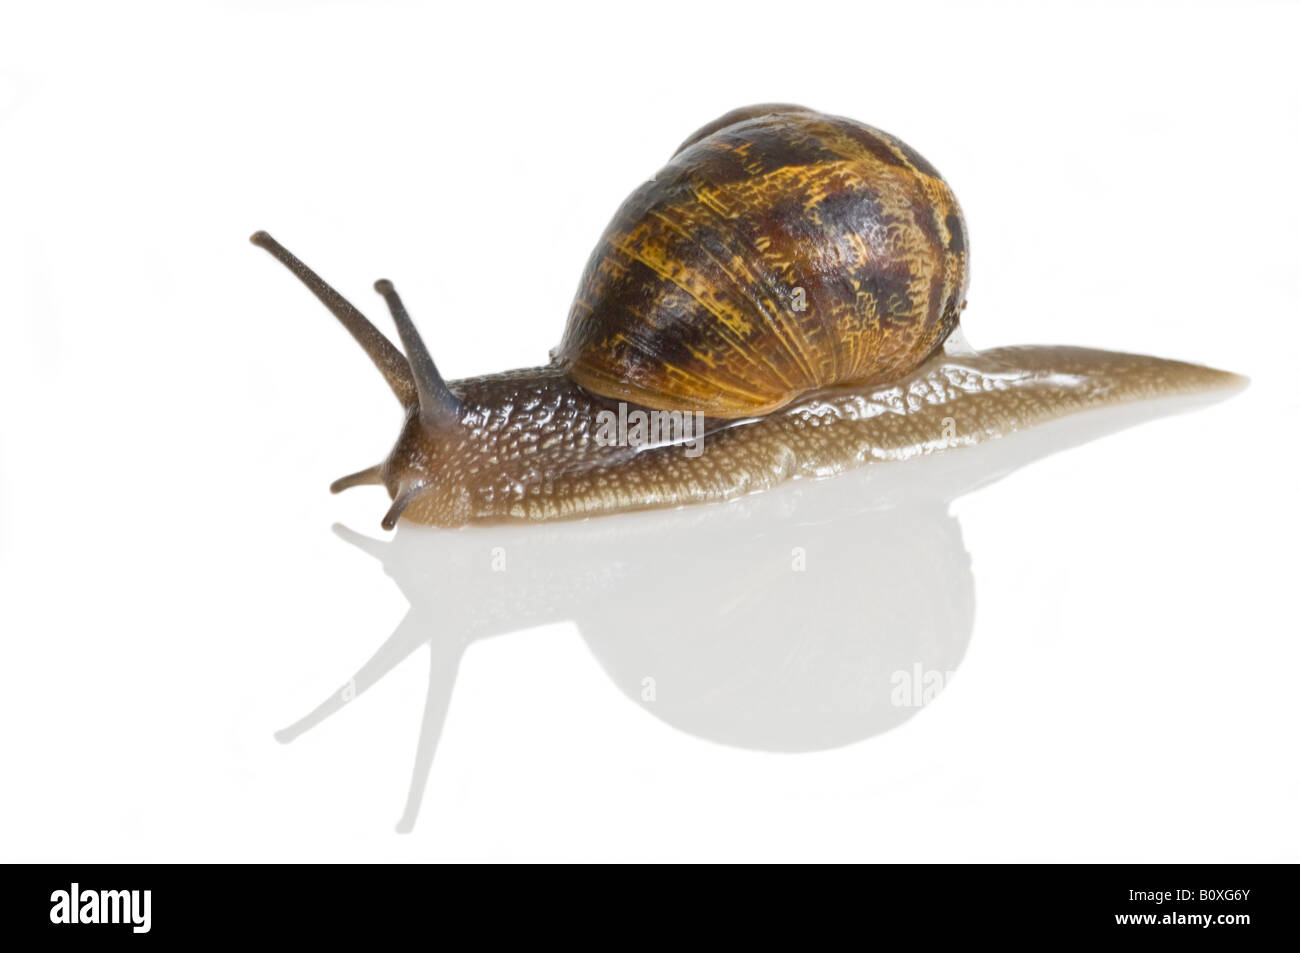 A common garden snail (Helix aspersa) against a pure white background. Stock Photo